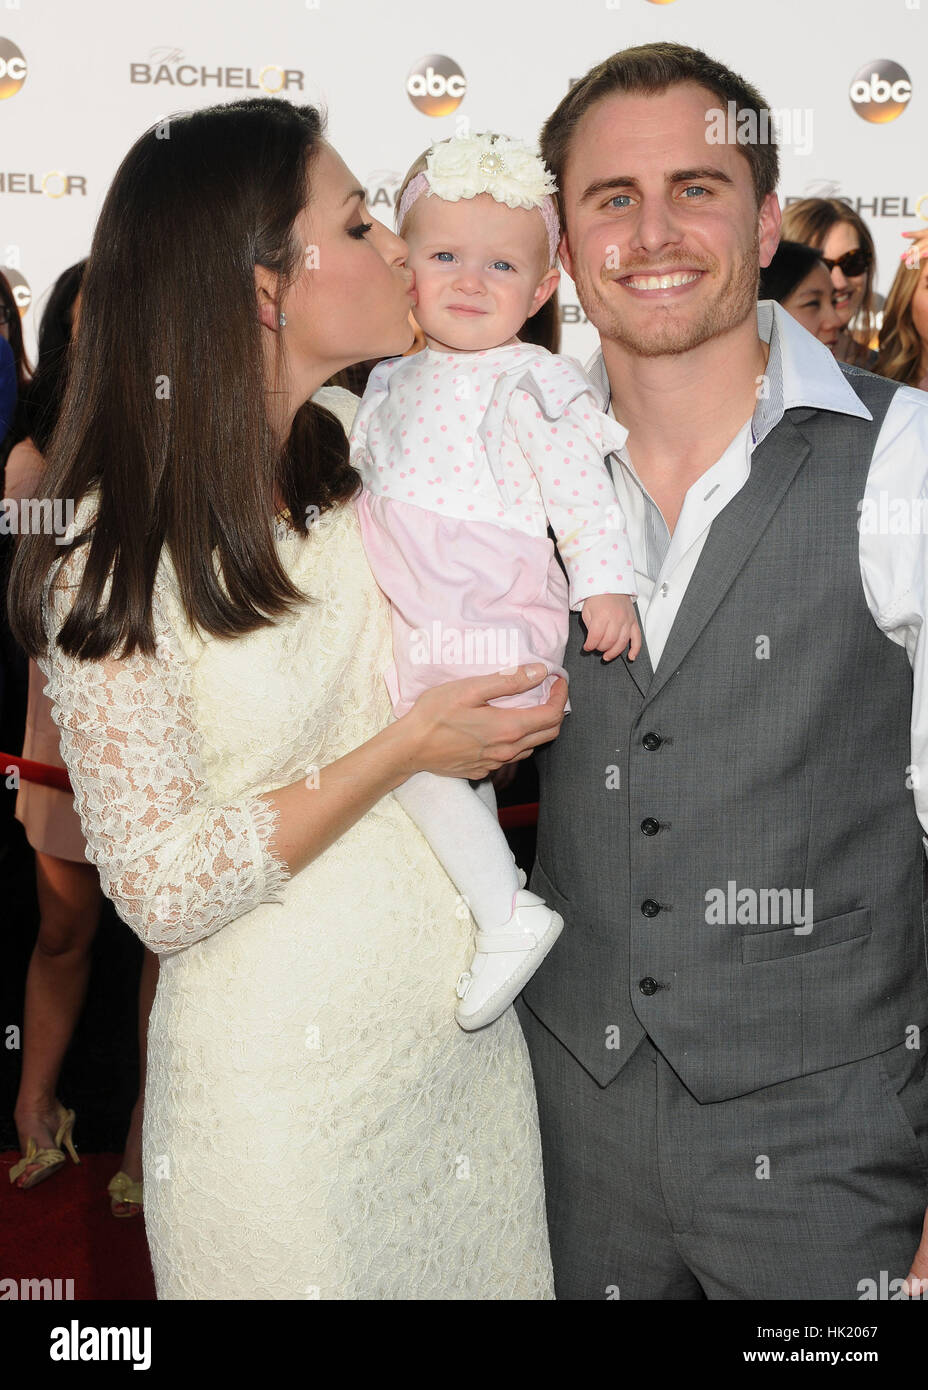 Hollywood, CA, USA. 5th Jan, 2015. 5 January 2015 - Hollywood, California - DeAnna Pappas Stagliano, Addison Stagliano, Stephen Stagliano. ABC's ''The Bachelor'' Season 19 Premiere held at Line 204 East Stages. Photo Credit: Byron Purvis/AdMedia Credit: Byron Purvis/AdMedia/ZUMA Wire/Alamy Live News Stock Photo